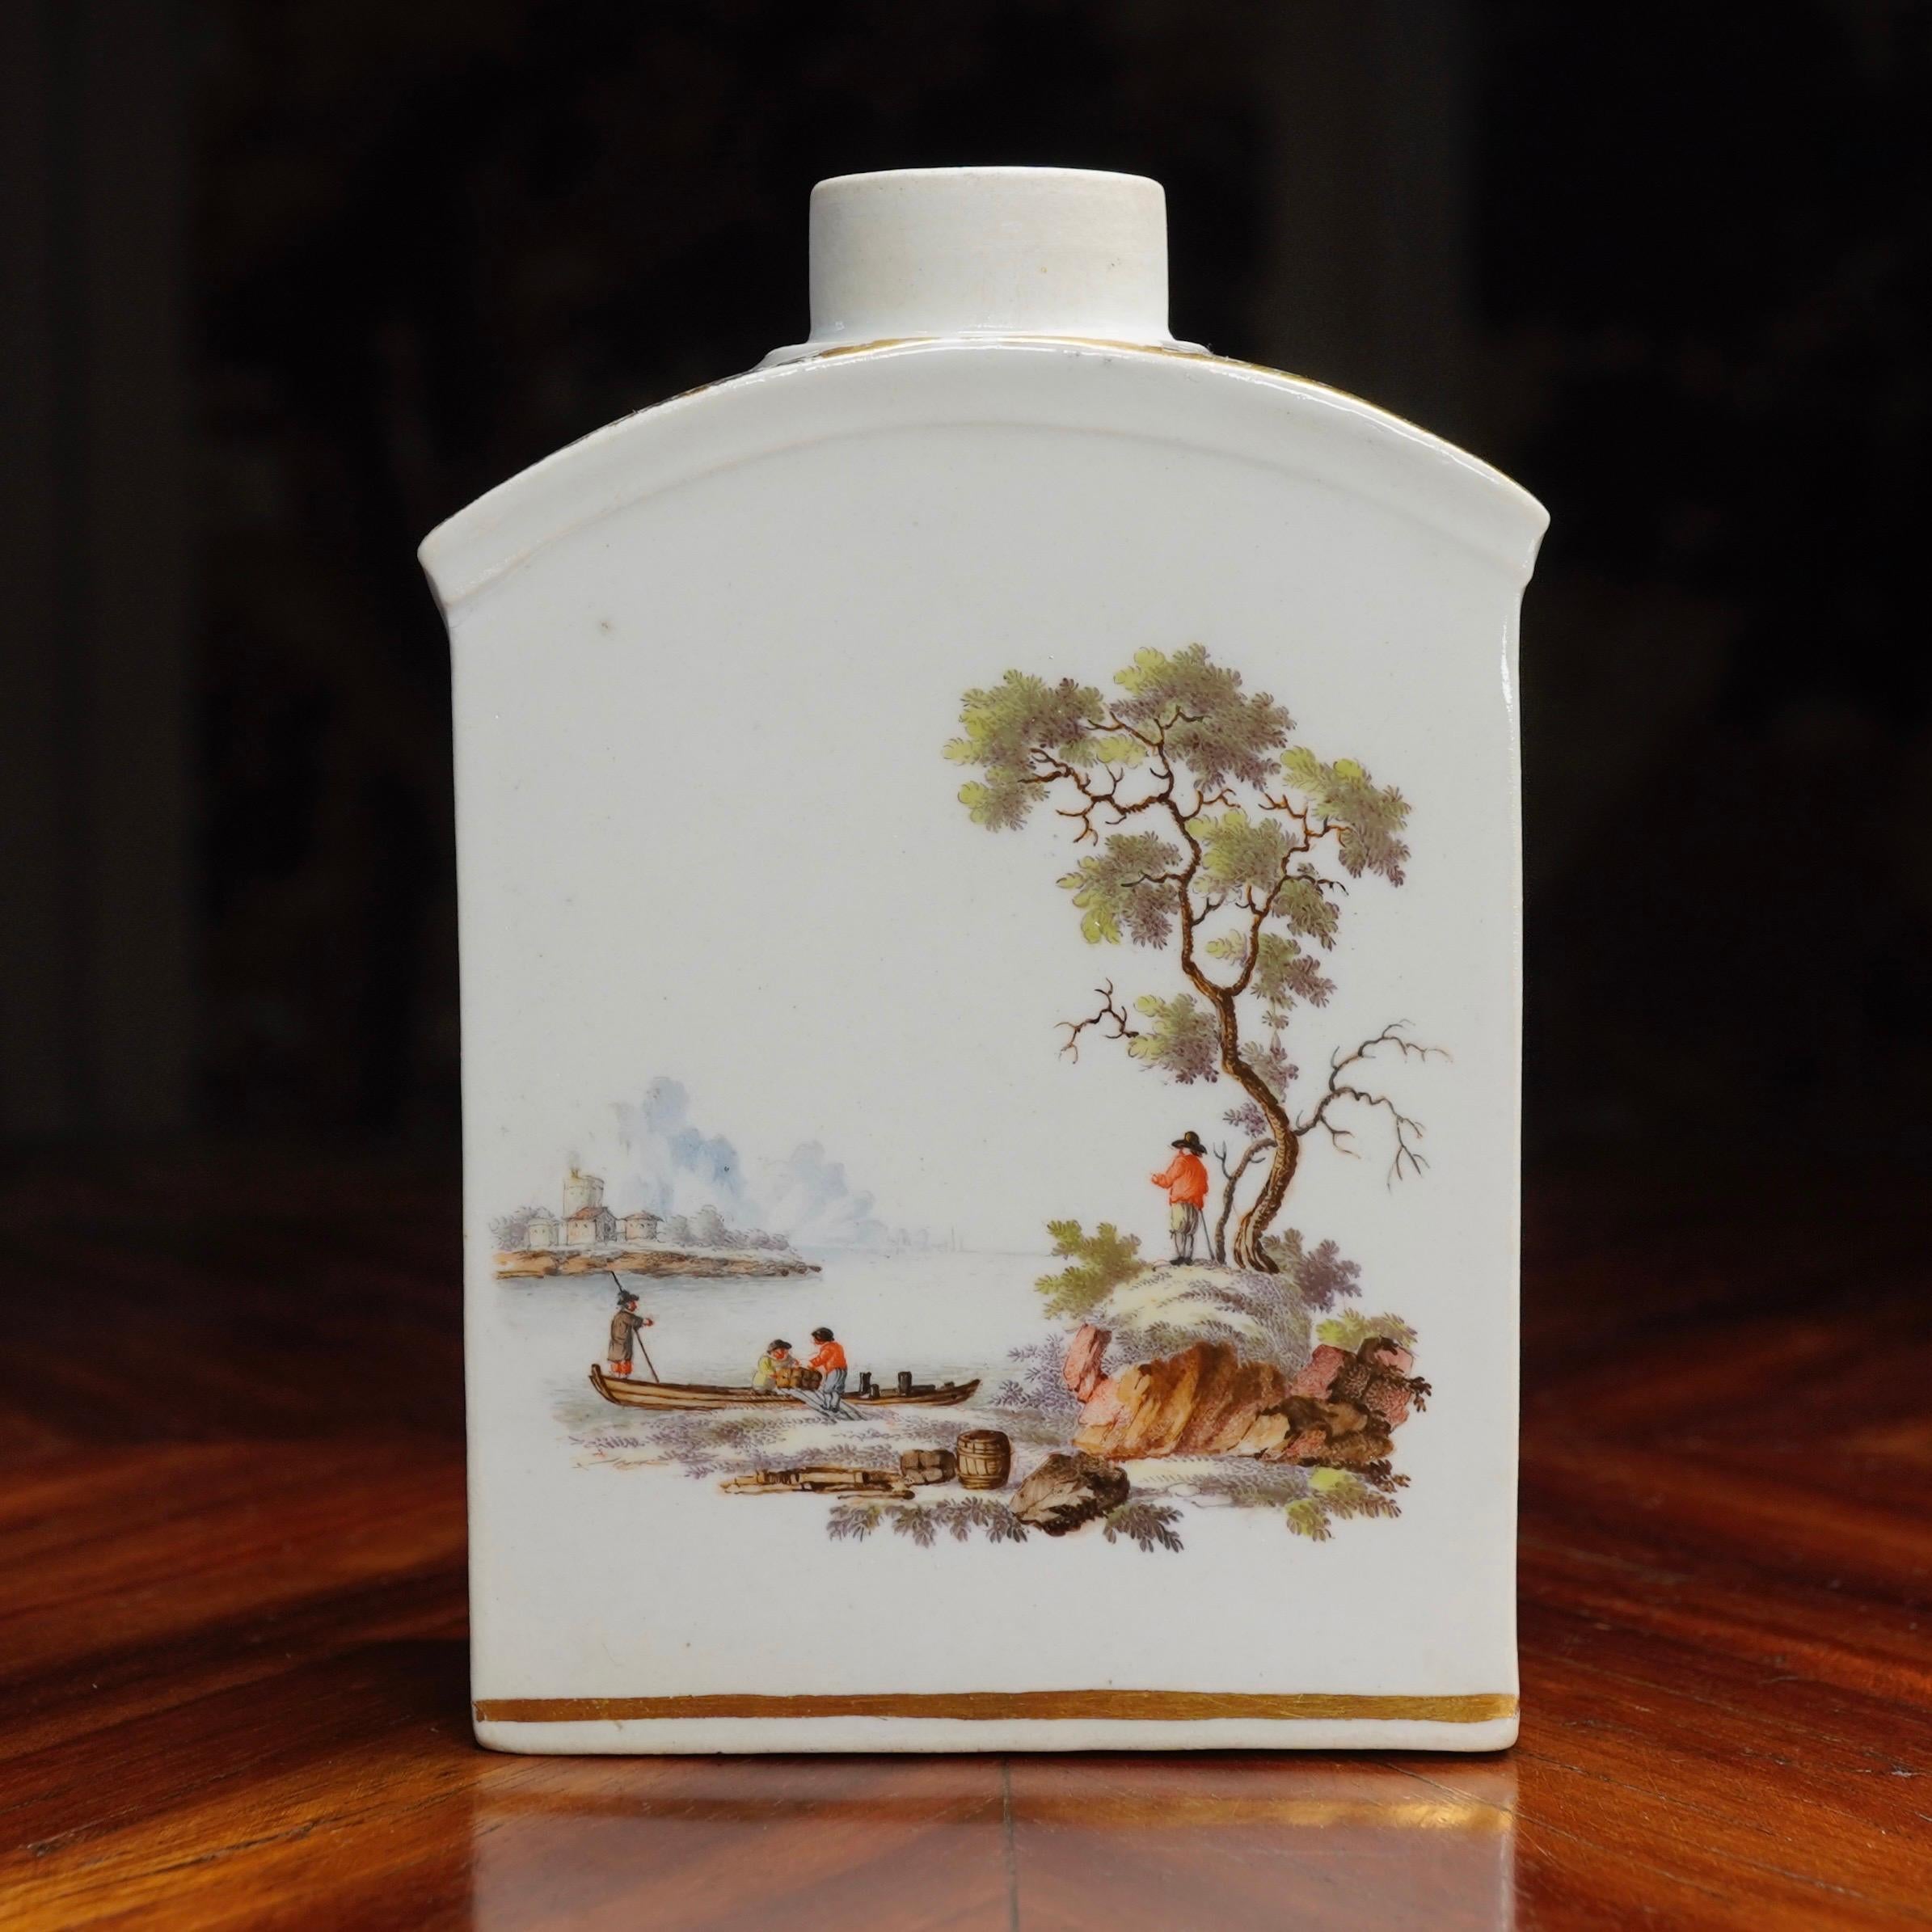 Zurich Swiss Porcelain Tea Canister, Finely Painted Landscapes, circa 1775 In Good Condition For Sale In Geelong, Victoria